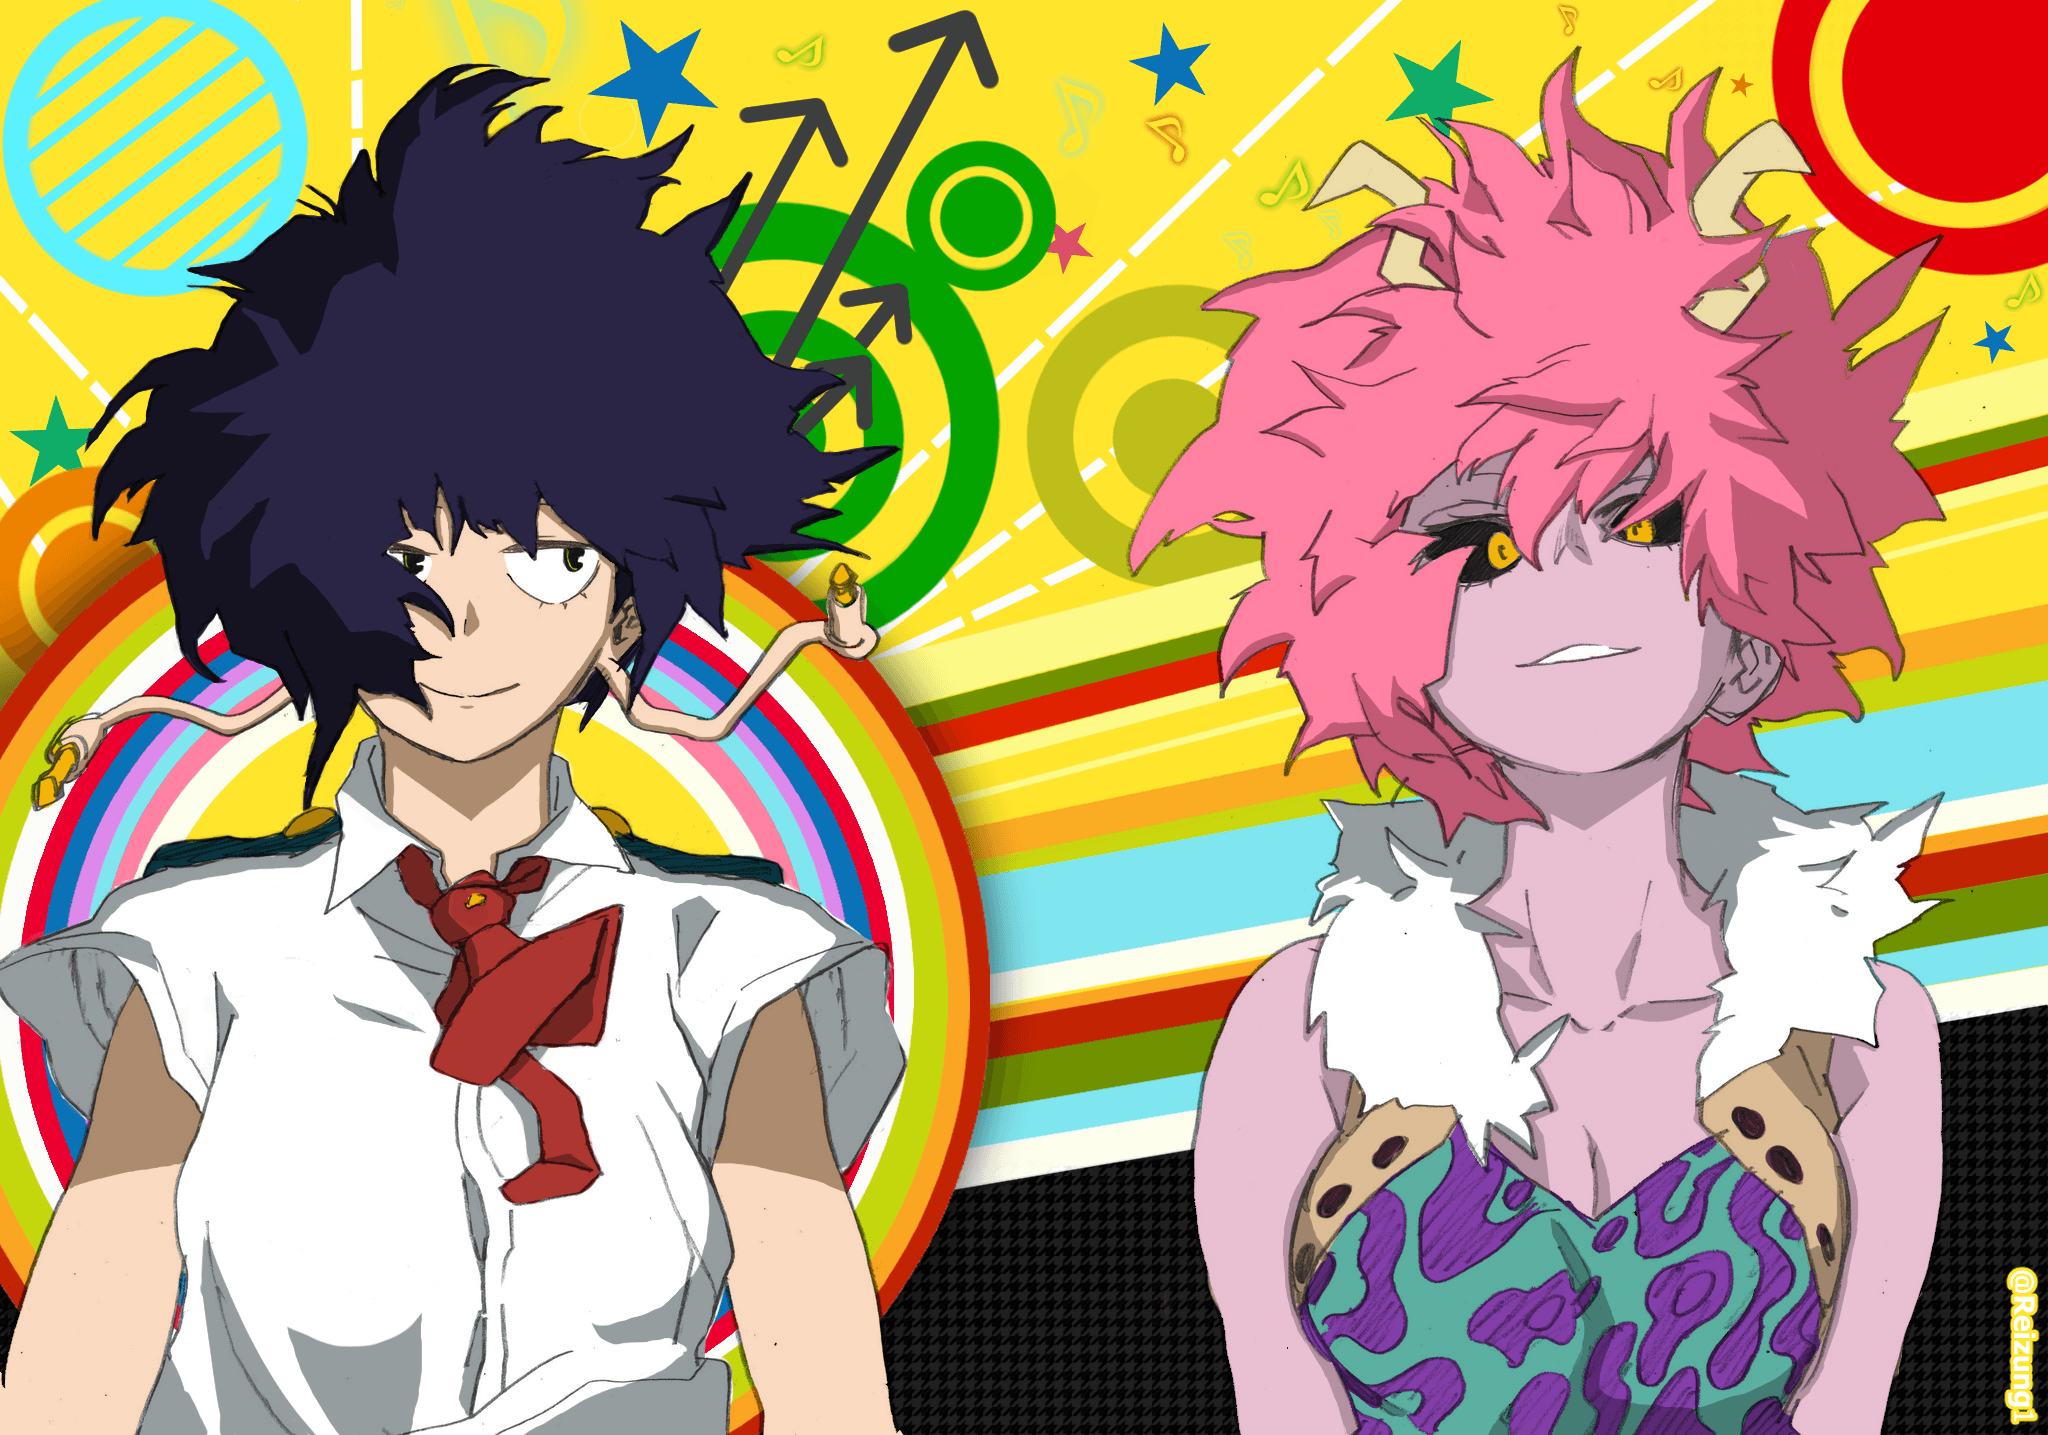 Mina and Jirou Persona 4 (+Different Saturation Levels)